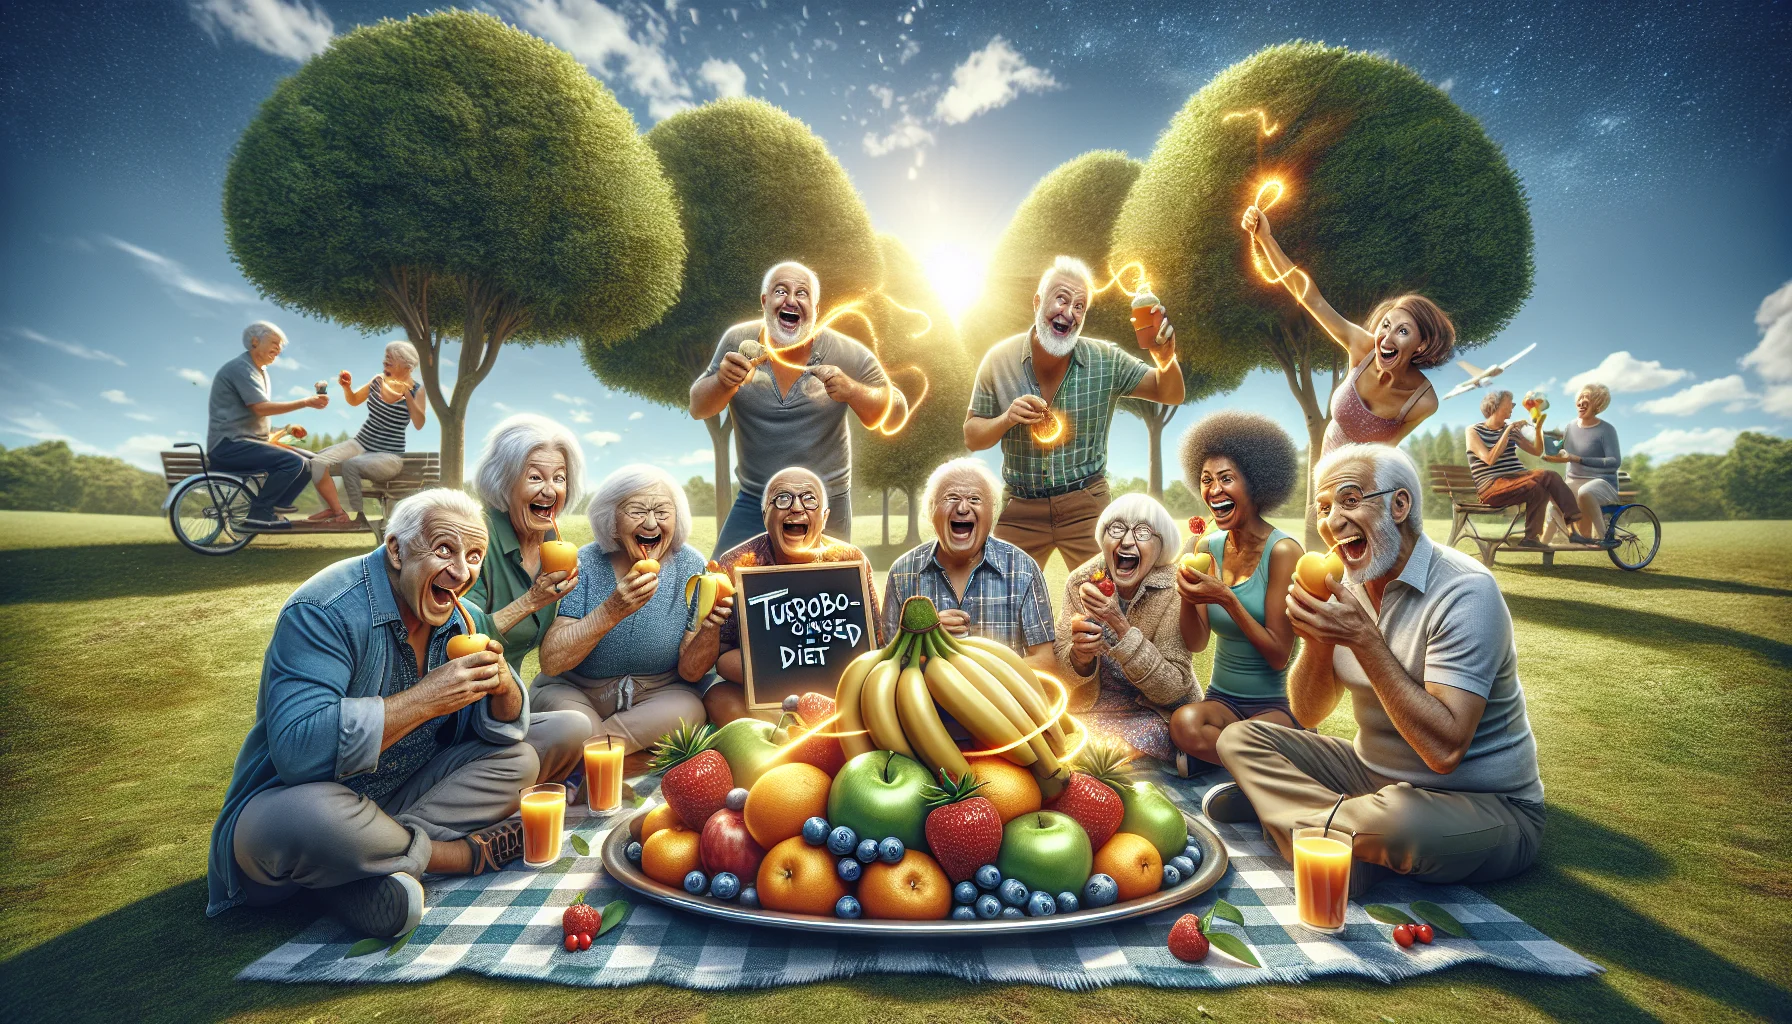 A humorous, realistic scene set in a sunny park where a group of joyful elderly people of different descents; including Caucasian, Black, Hispanic, Middle-Eastern, and South Asian are enjoying a variety of energy giving fruits like bananas, apples, blueberries, and oranges. They are laughing and jesting, some are sitting on picnic blankets, others on park benches. Their fruits are glowing dimly to symbolize their energy-boosting properties. A platter with a clever note that reads 'Turbo-charged Diet' is in the center of the group. Background trees and a dazzling sky complete the scene.